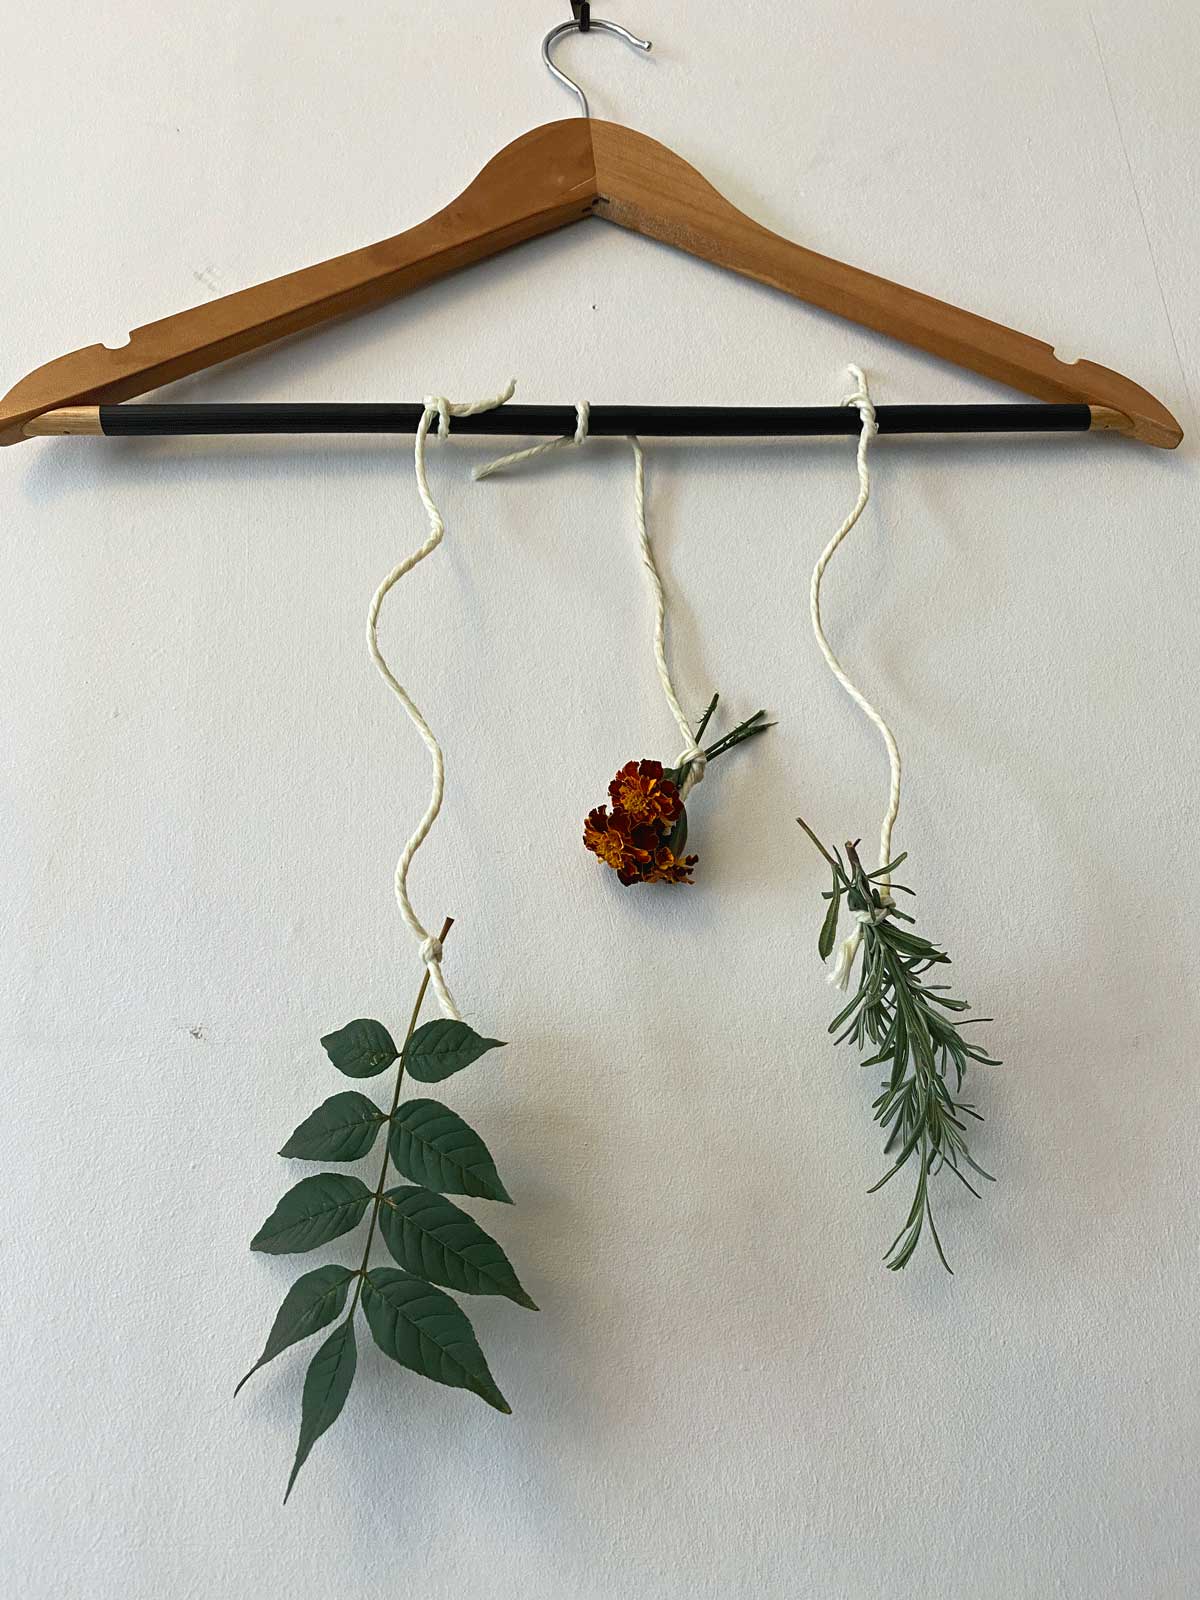 A photo of a mobile made out lavender, marigolds and a ash leaf hanging from a coat hanger with string.